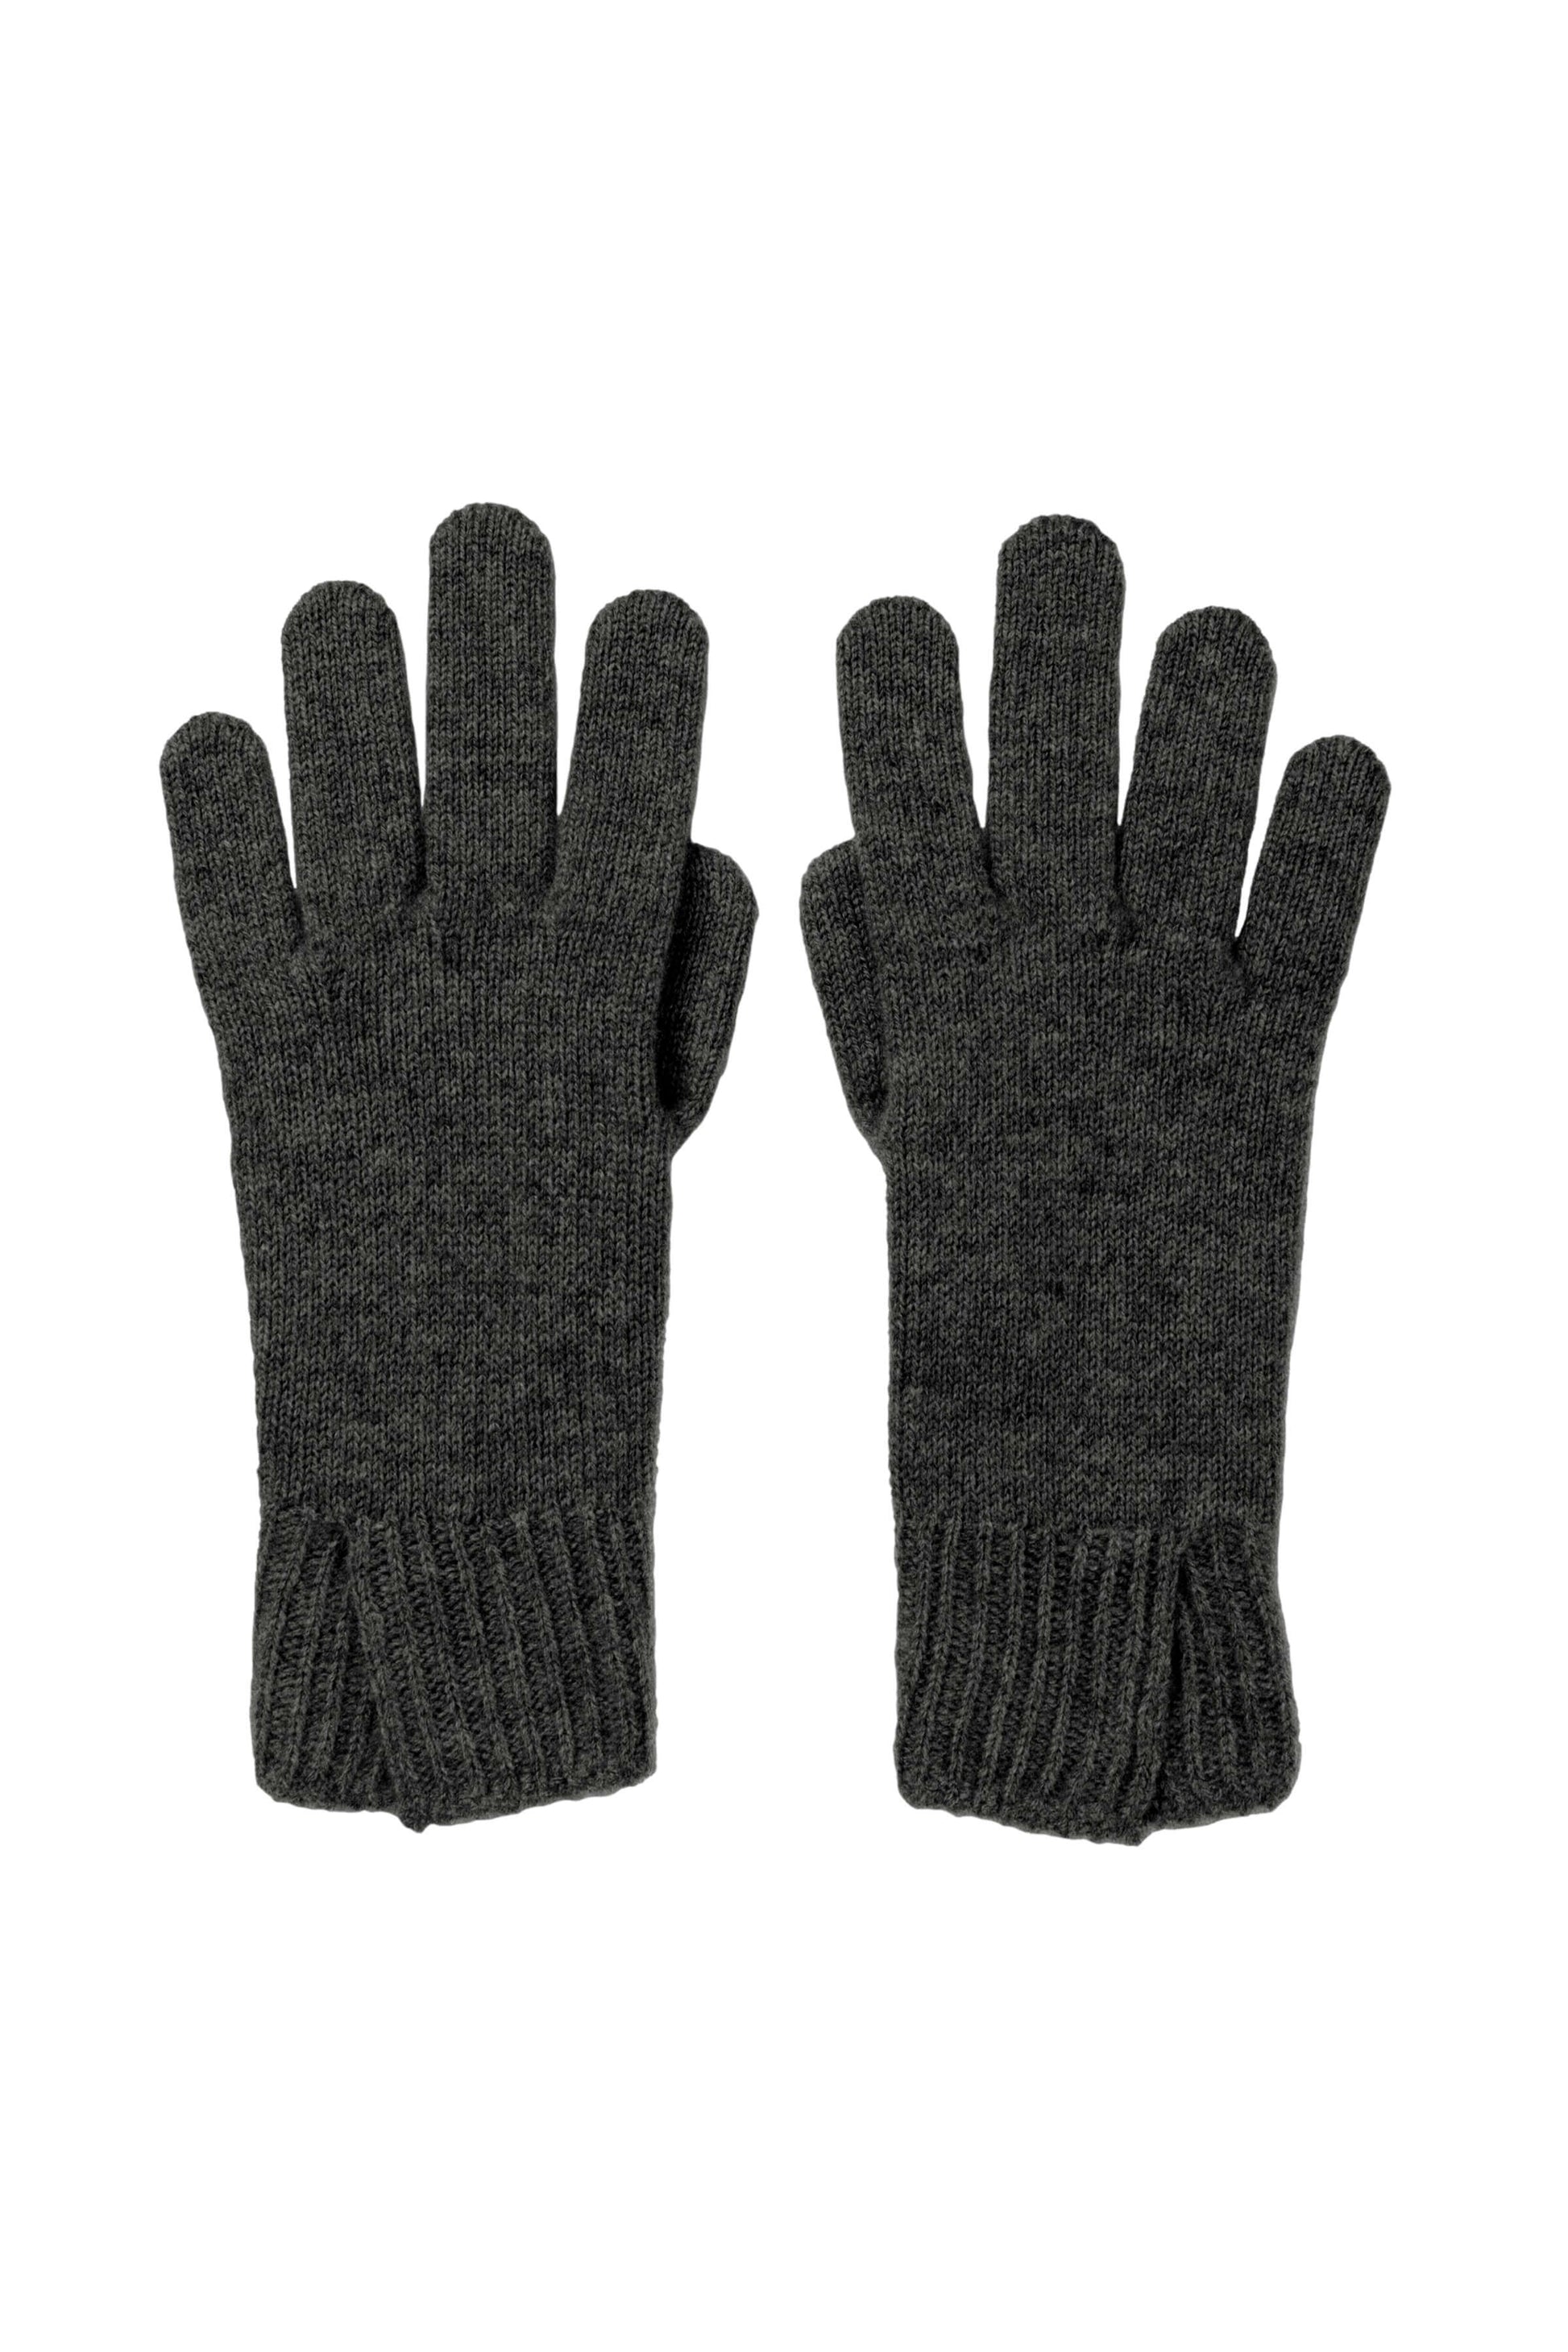 Johnstons of Elgin AW24 Knitted Accessory Mid Grey Split Cuff Cashmere Gloves HAE03228HA4181ONE